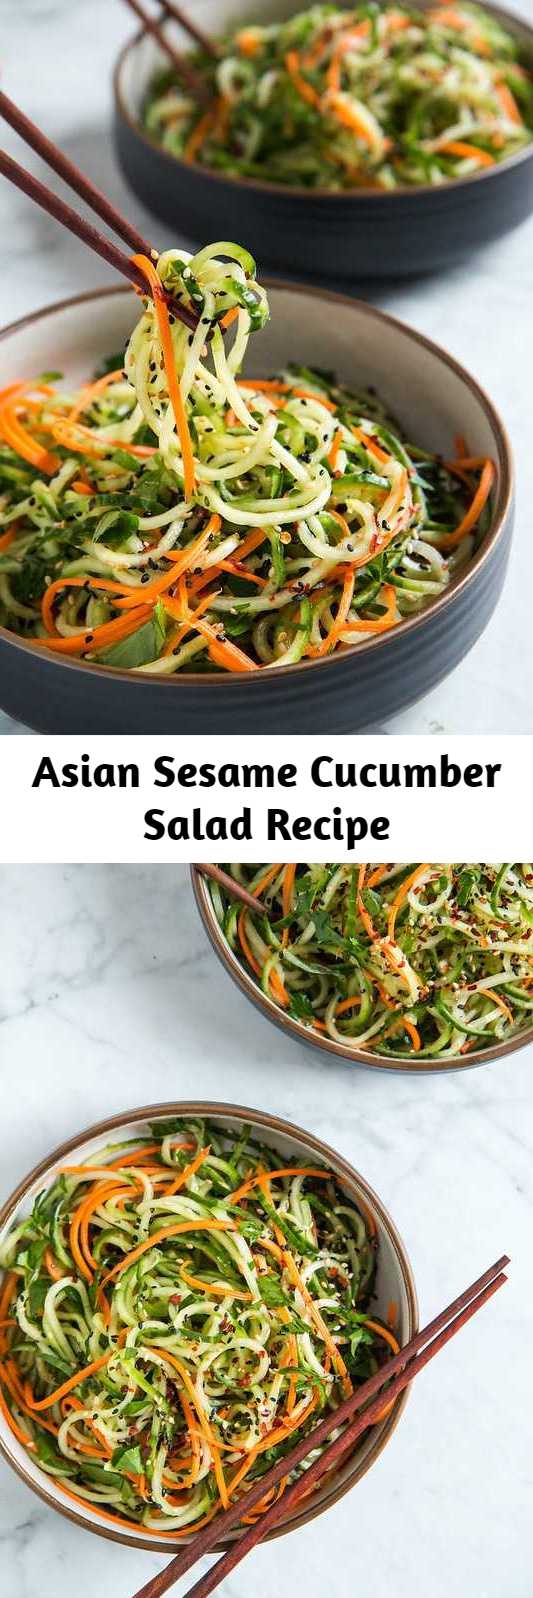 Asian Sesame Cucumber Salad Recipe - This is one of those things you can throw together on a daily basis, because besides the cucumber, everything in it is just a pantry staple. Crunchy, refreshing, flavorful, and it doesn’t threaten my chances of winning laziest person of the year award? Score!